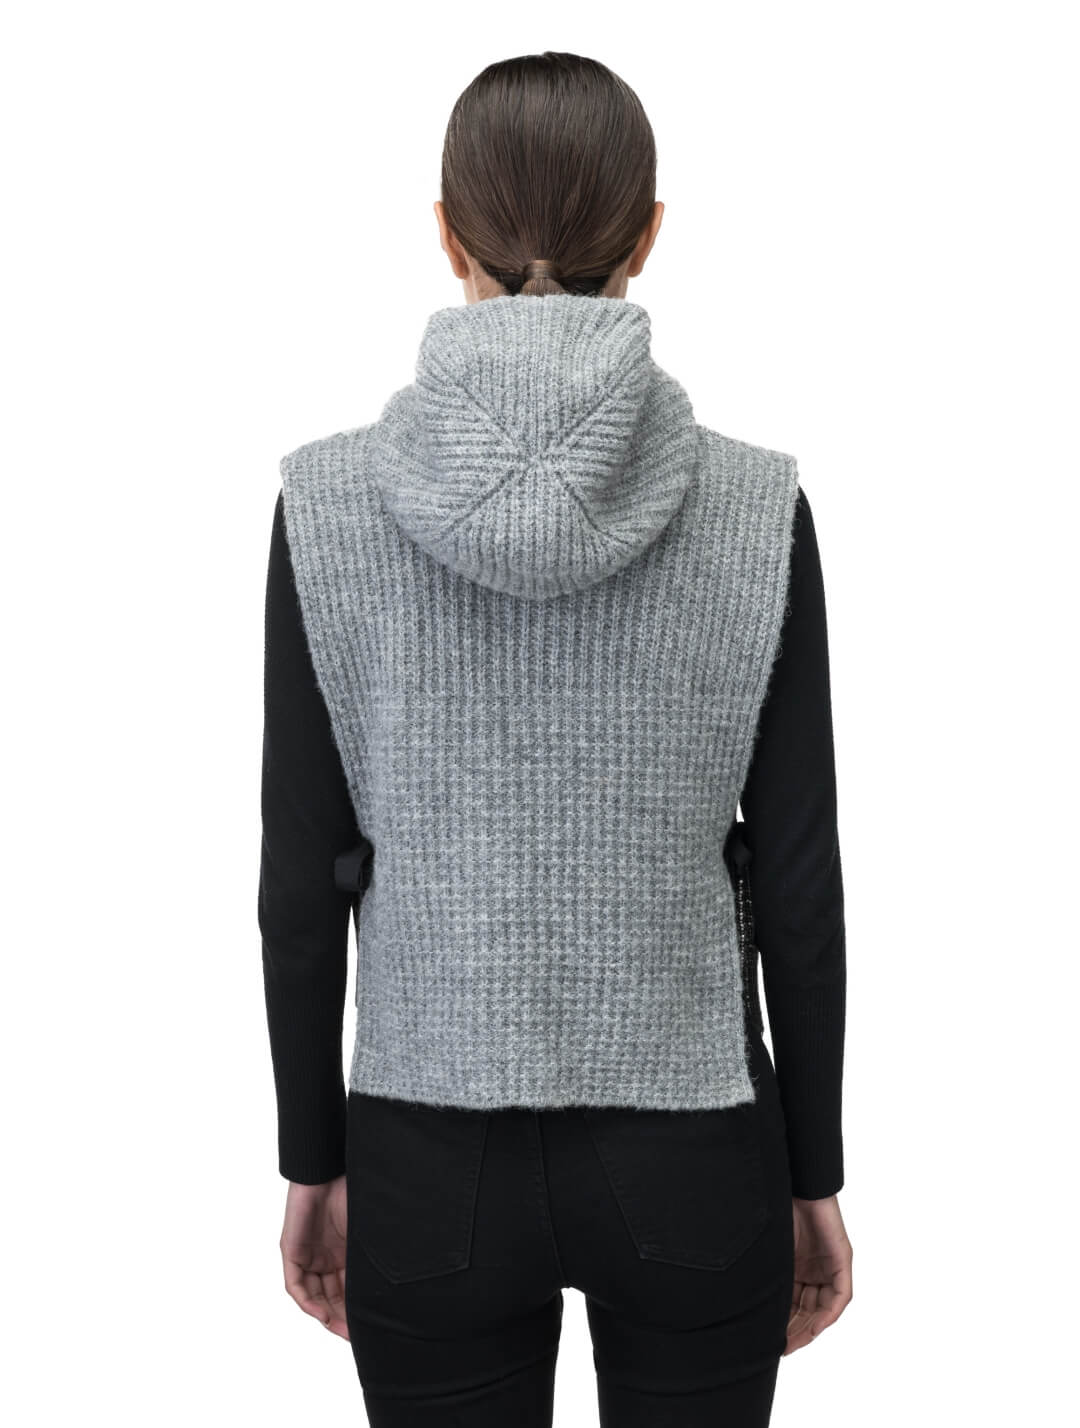 Nars Unisex Knit Hooded Dickie in in superfine alpaca and merino wool blend, waist length, fitted hood, sleeveless torso, and side webbing straps to adjust fit, in Grey Melange